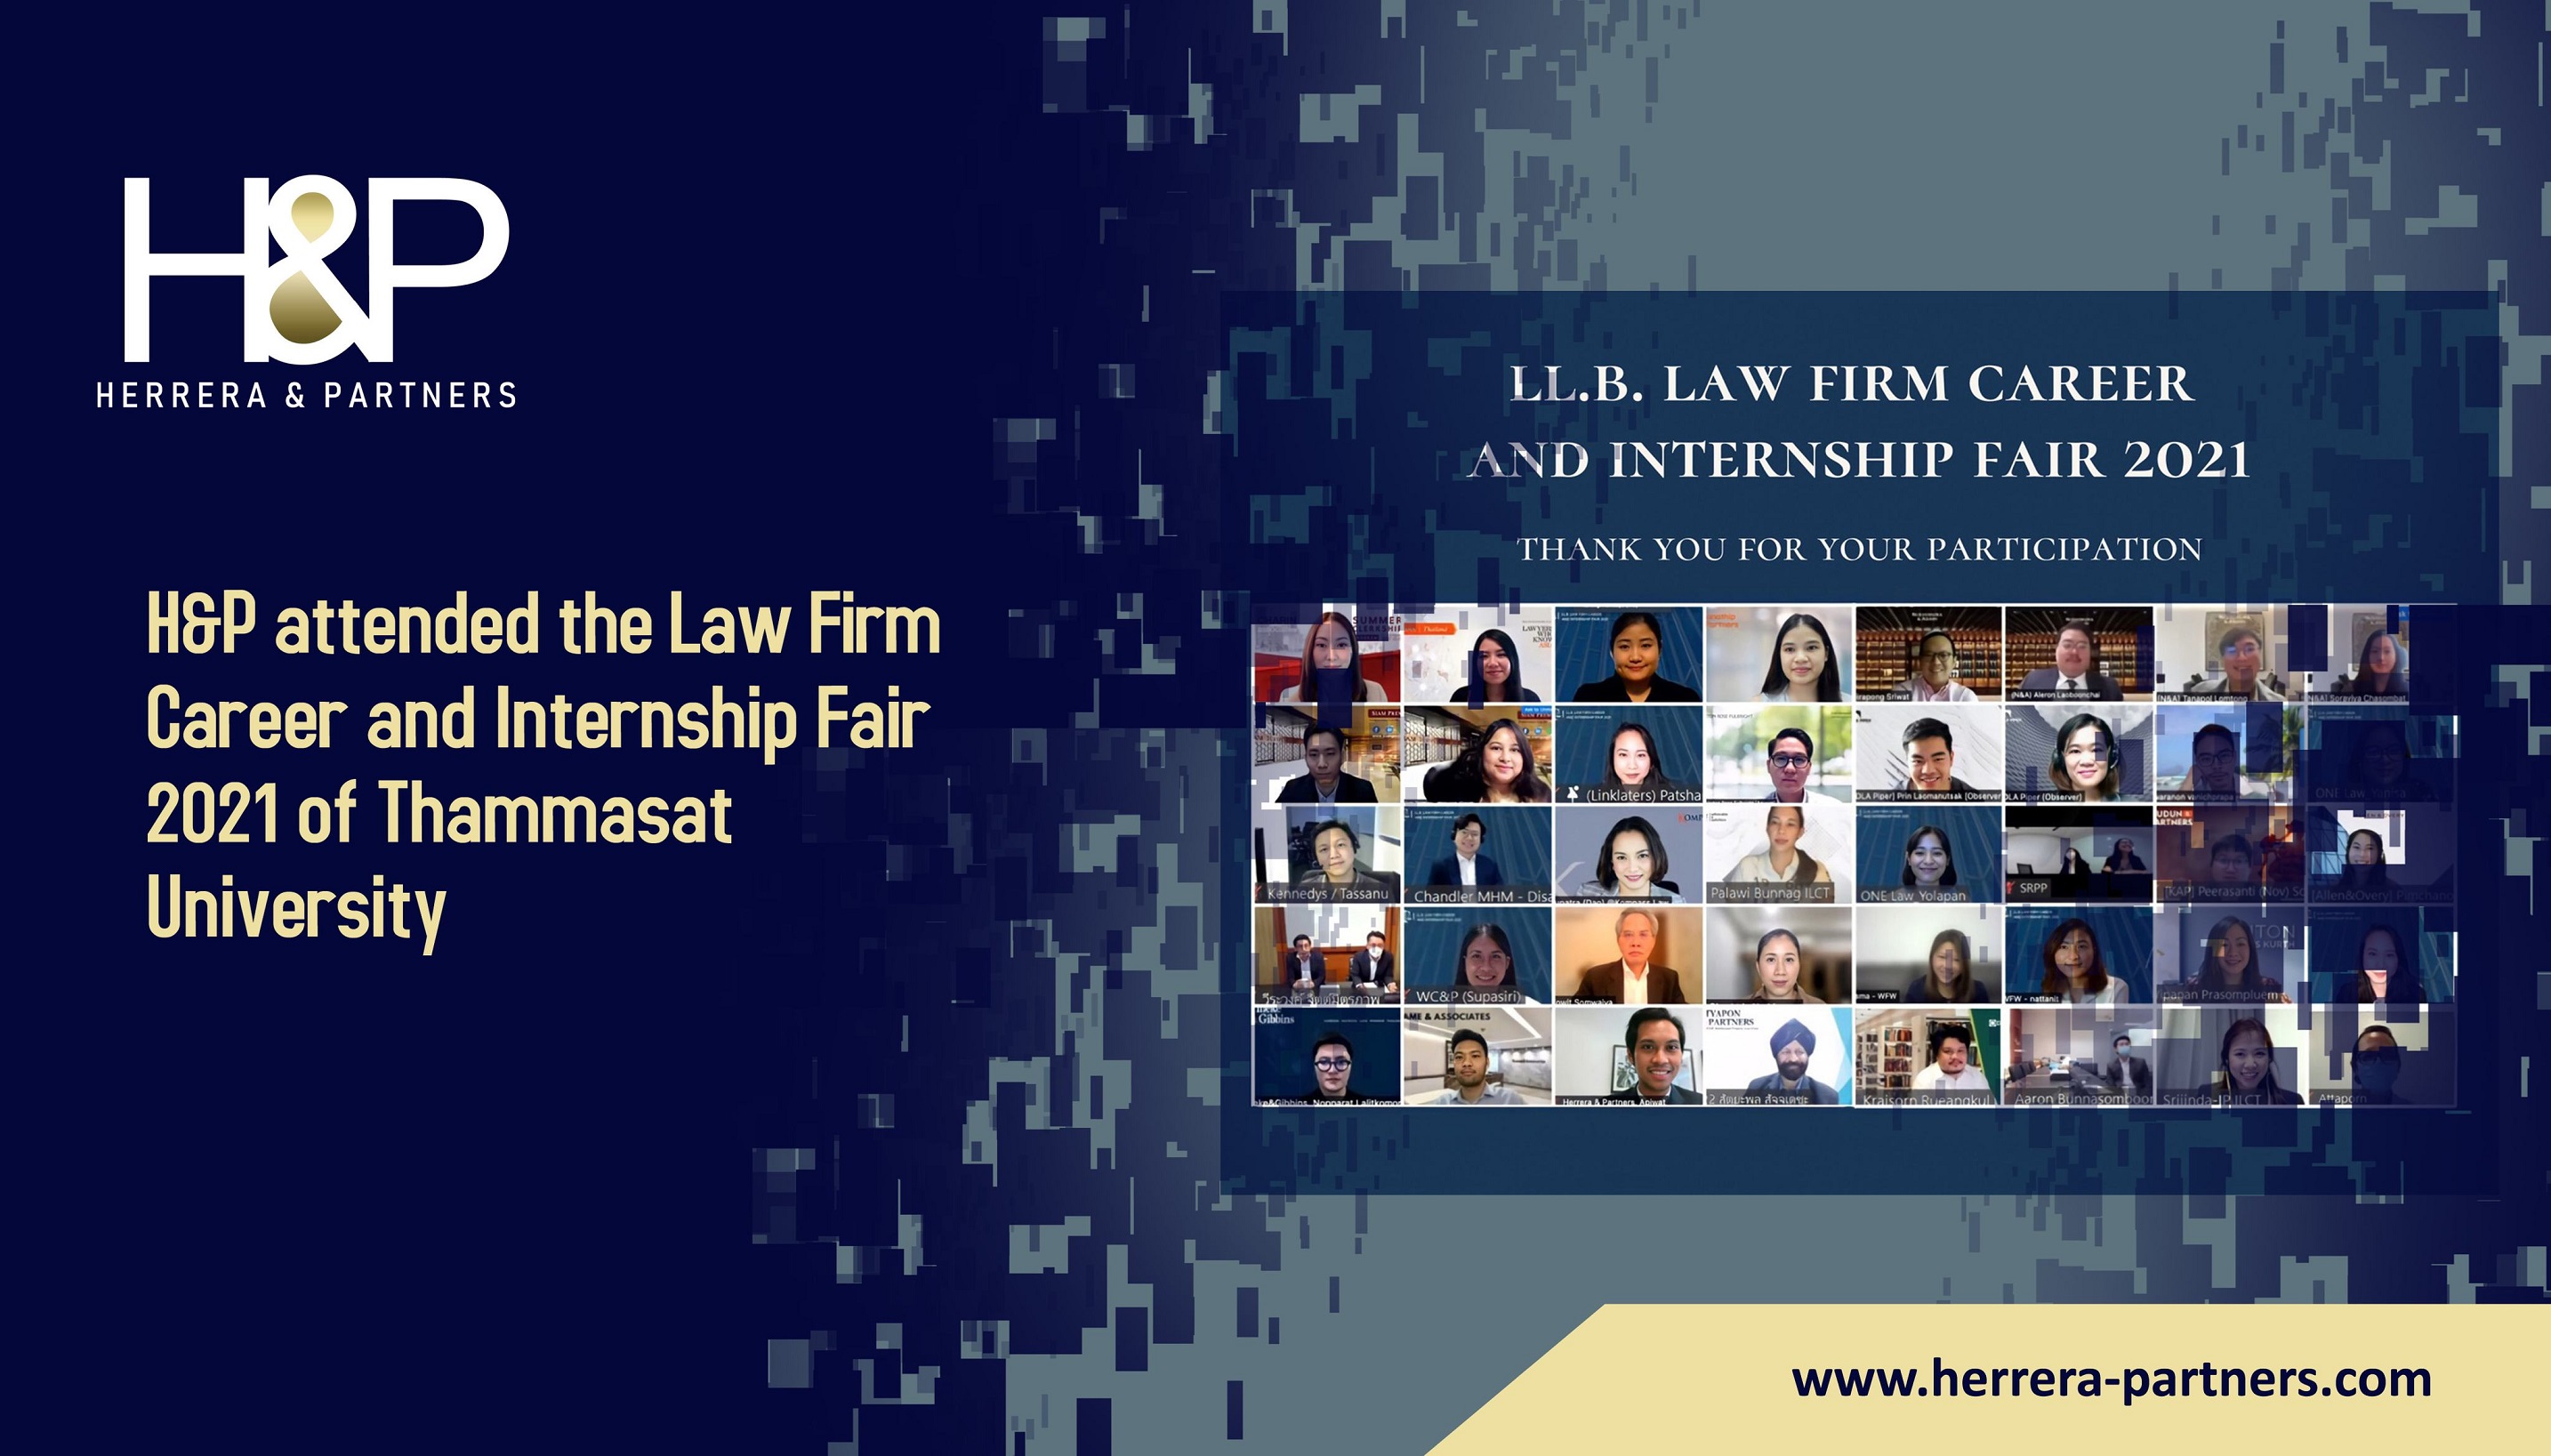 H&P attended the Law Firm Career and Internship Fair 2021 of Thammasat University H&P internship and career opportunities for lawyers in Bangkok